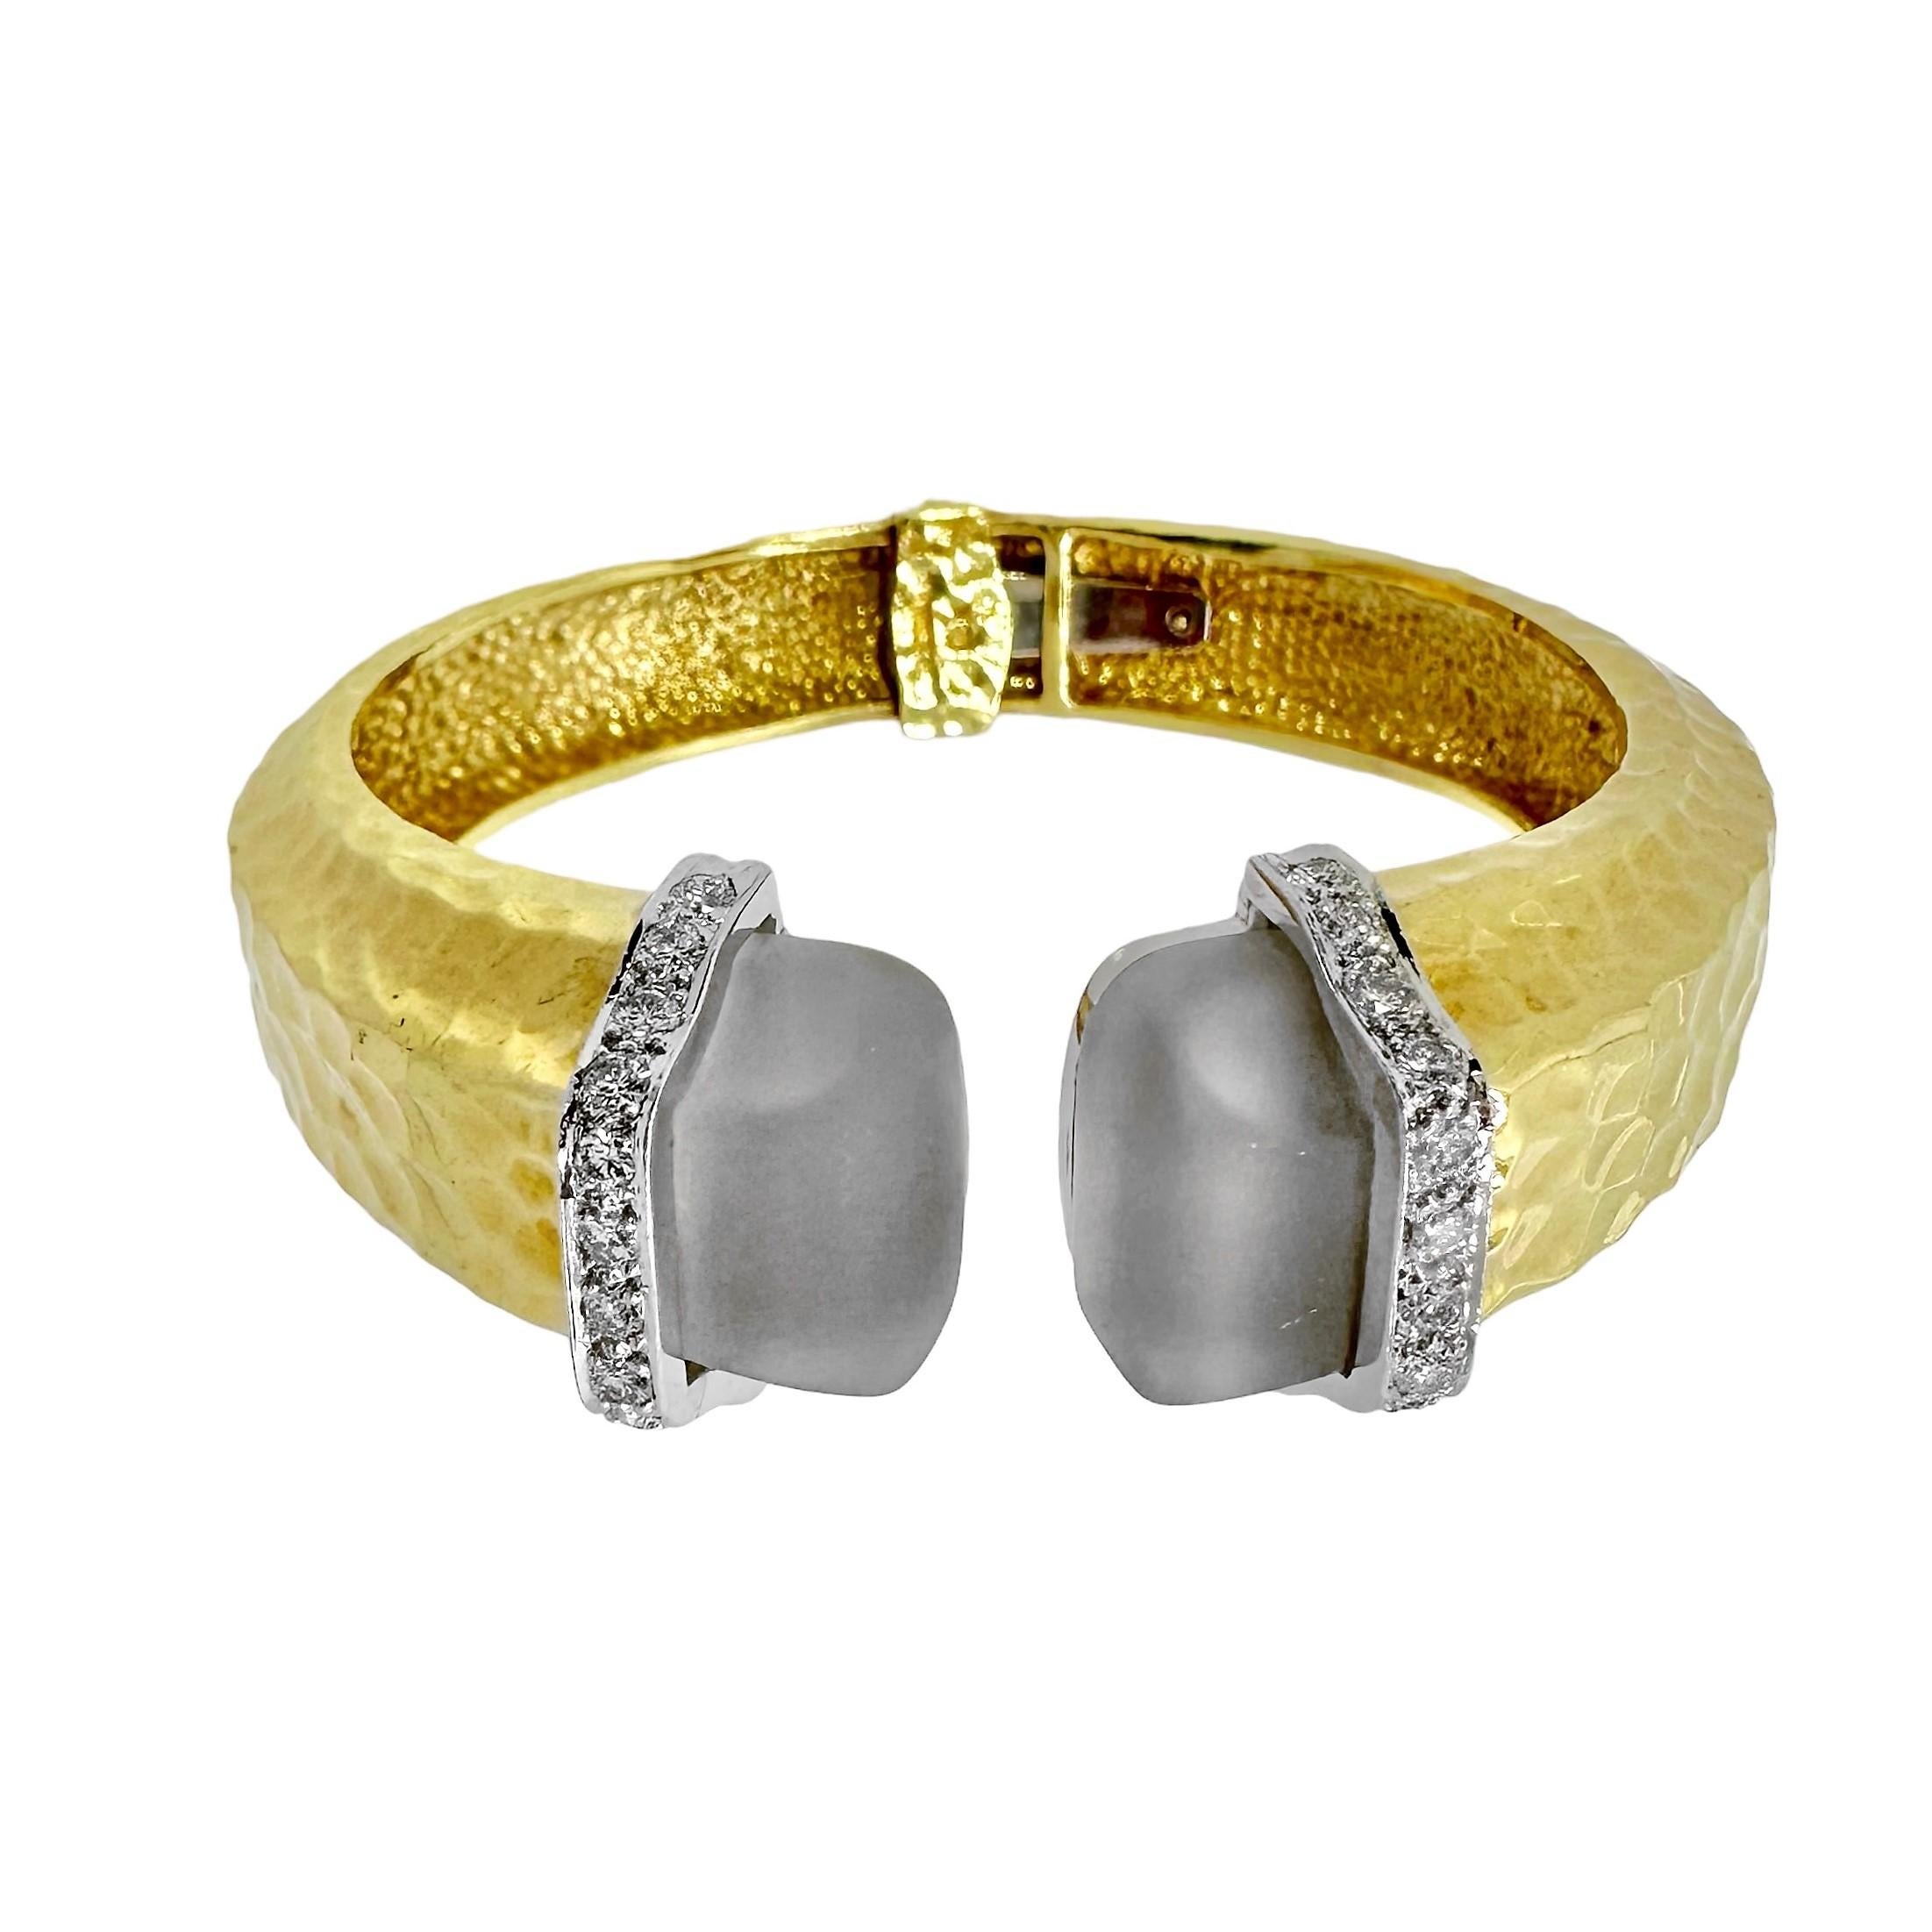 This substantial and Iconic vintage R. Stone original hinged 18k yellow gold bangle bracelet personifies pure 1960's high fashion. Every surface is deeply hammered and, at 7/8 inches in width, it is impressive to behold. Opening at the front, two